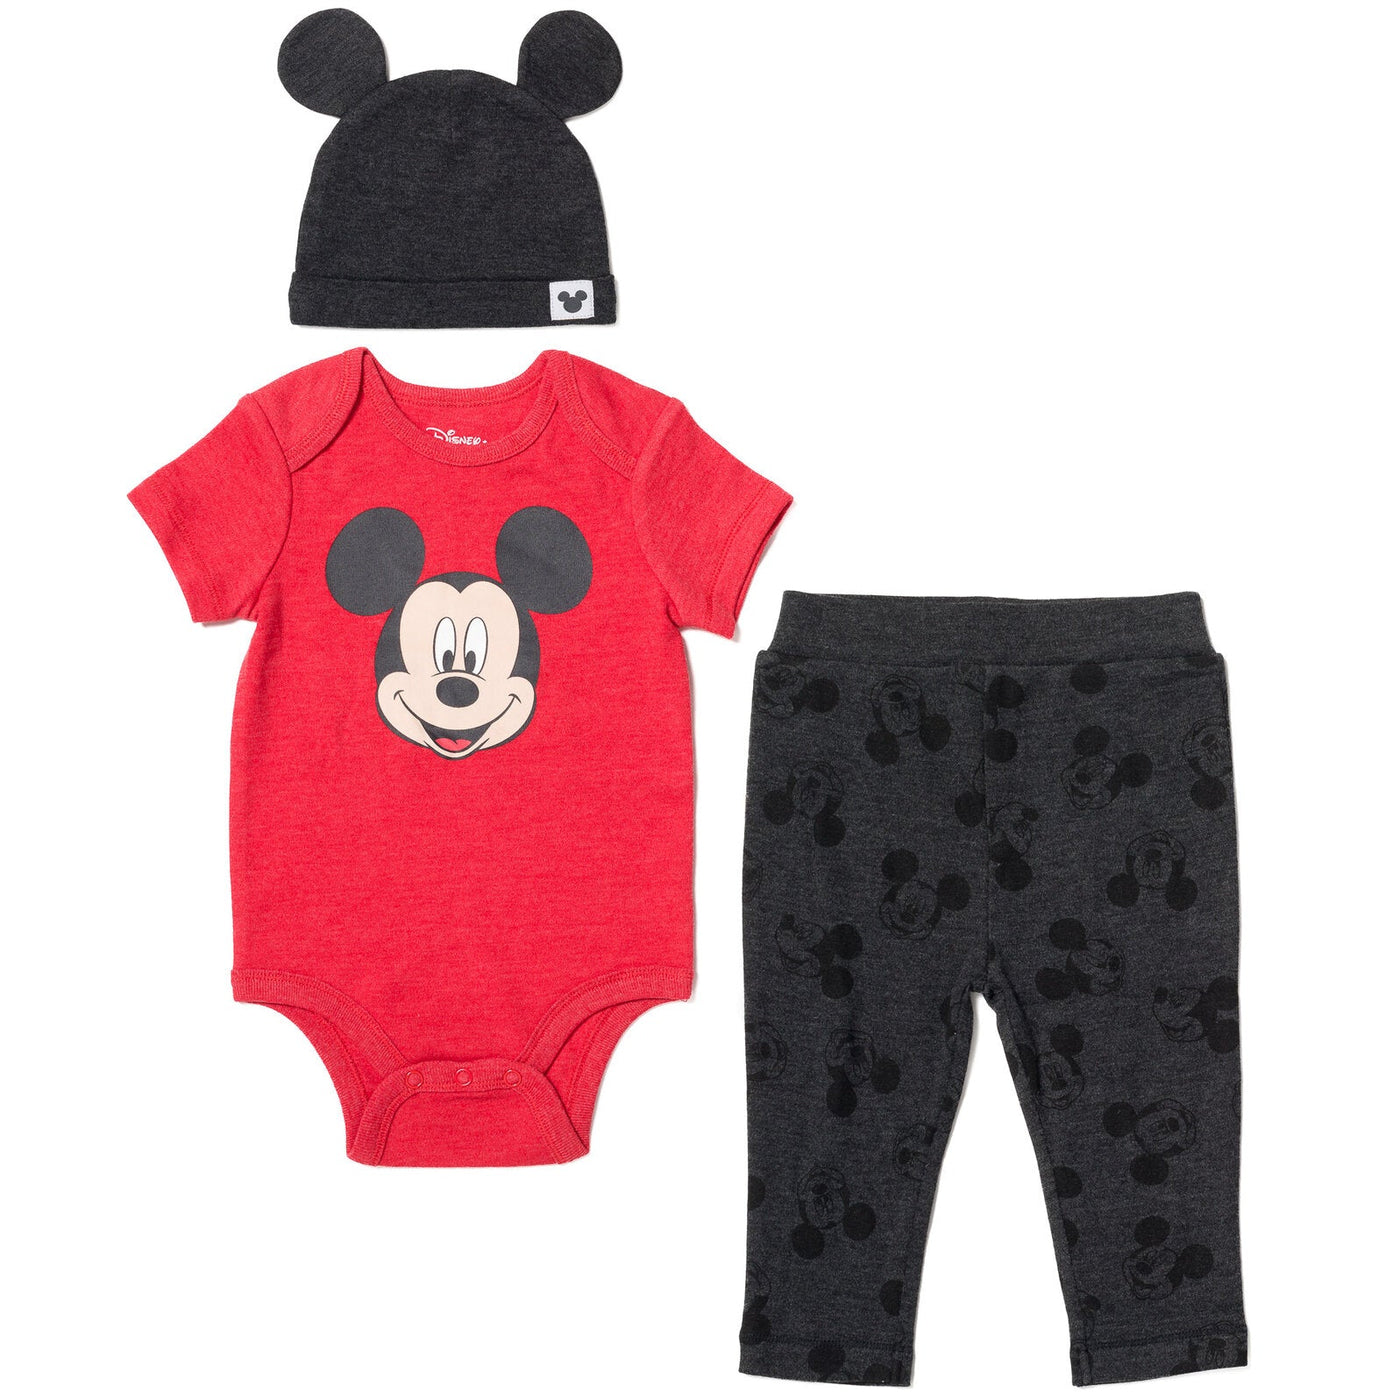 Disney Mickey Mouse Winnie the Pooh Baby Bodysuit Pants and Hat 3 Piece Outfit Set Newborn to Infant - imagikids